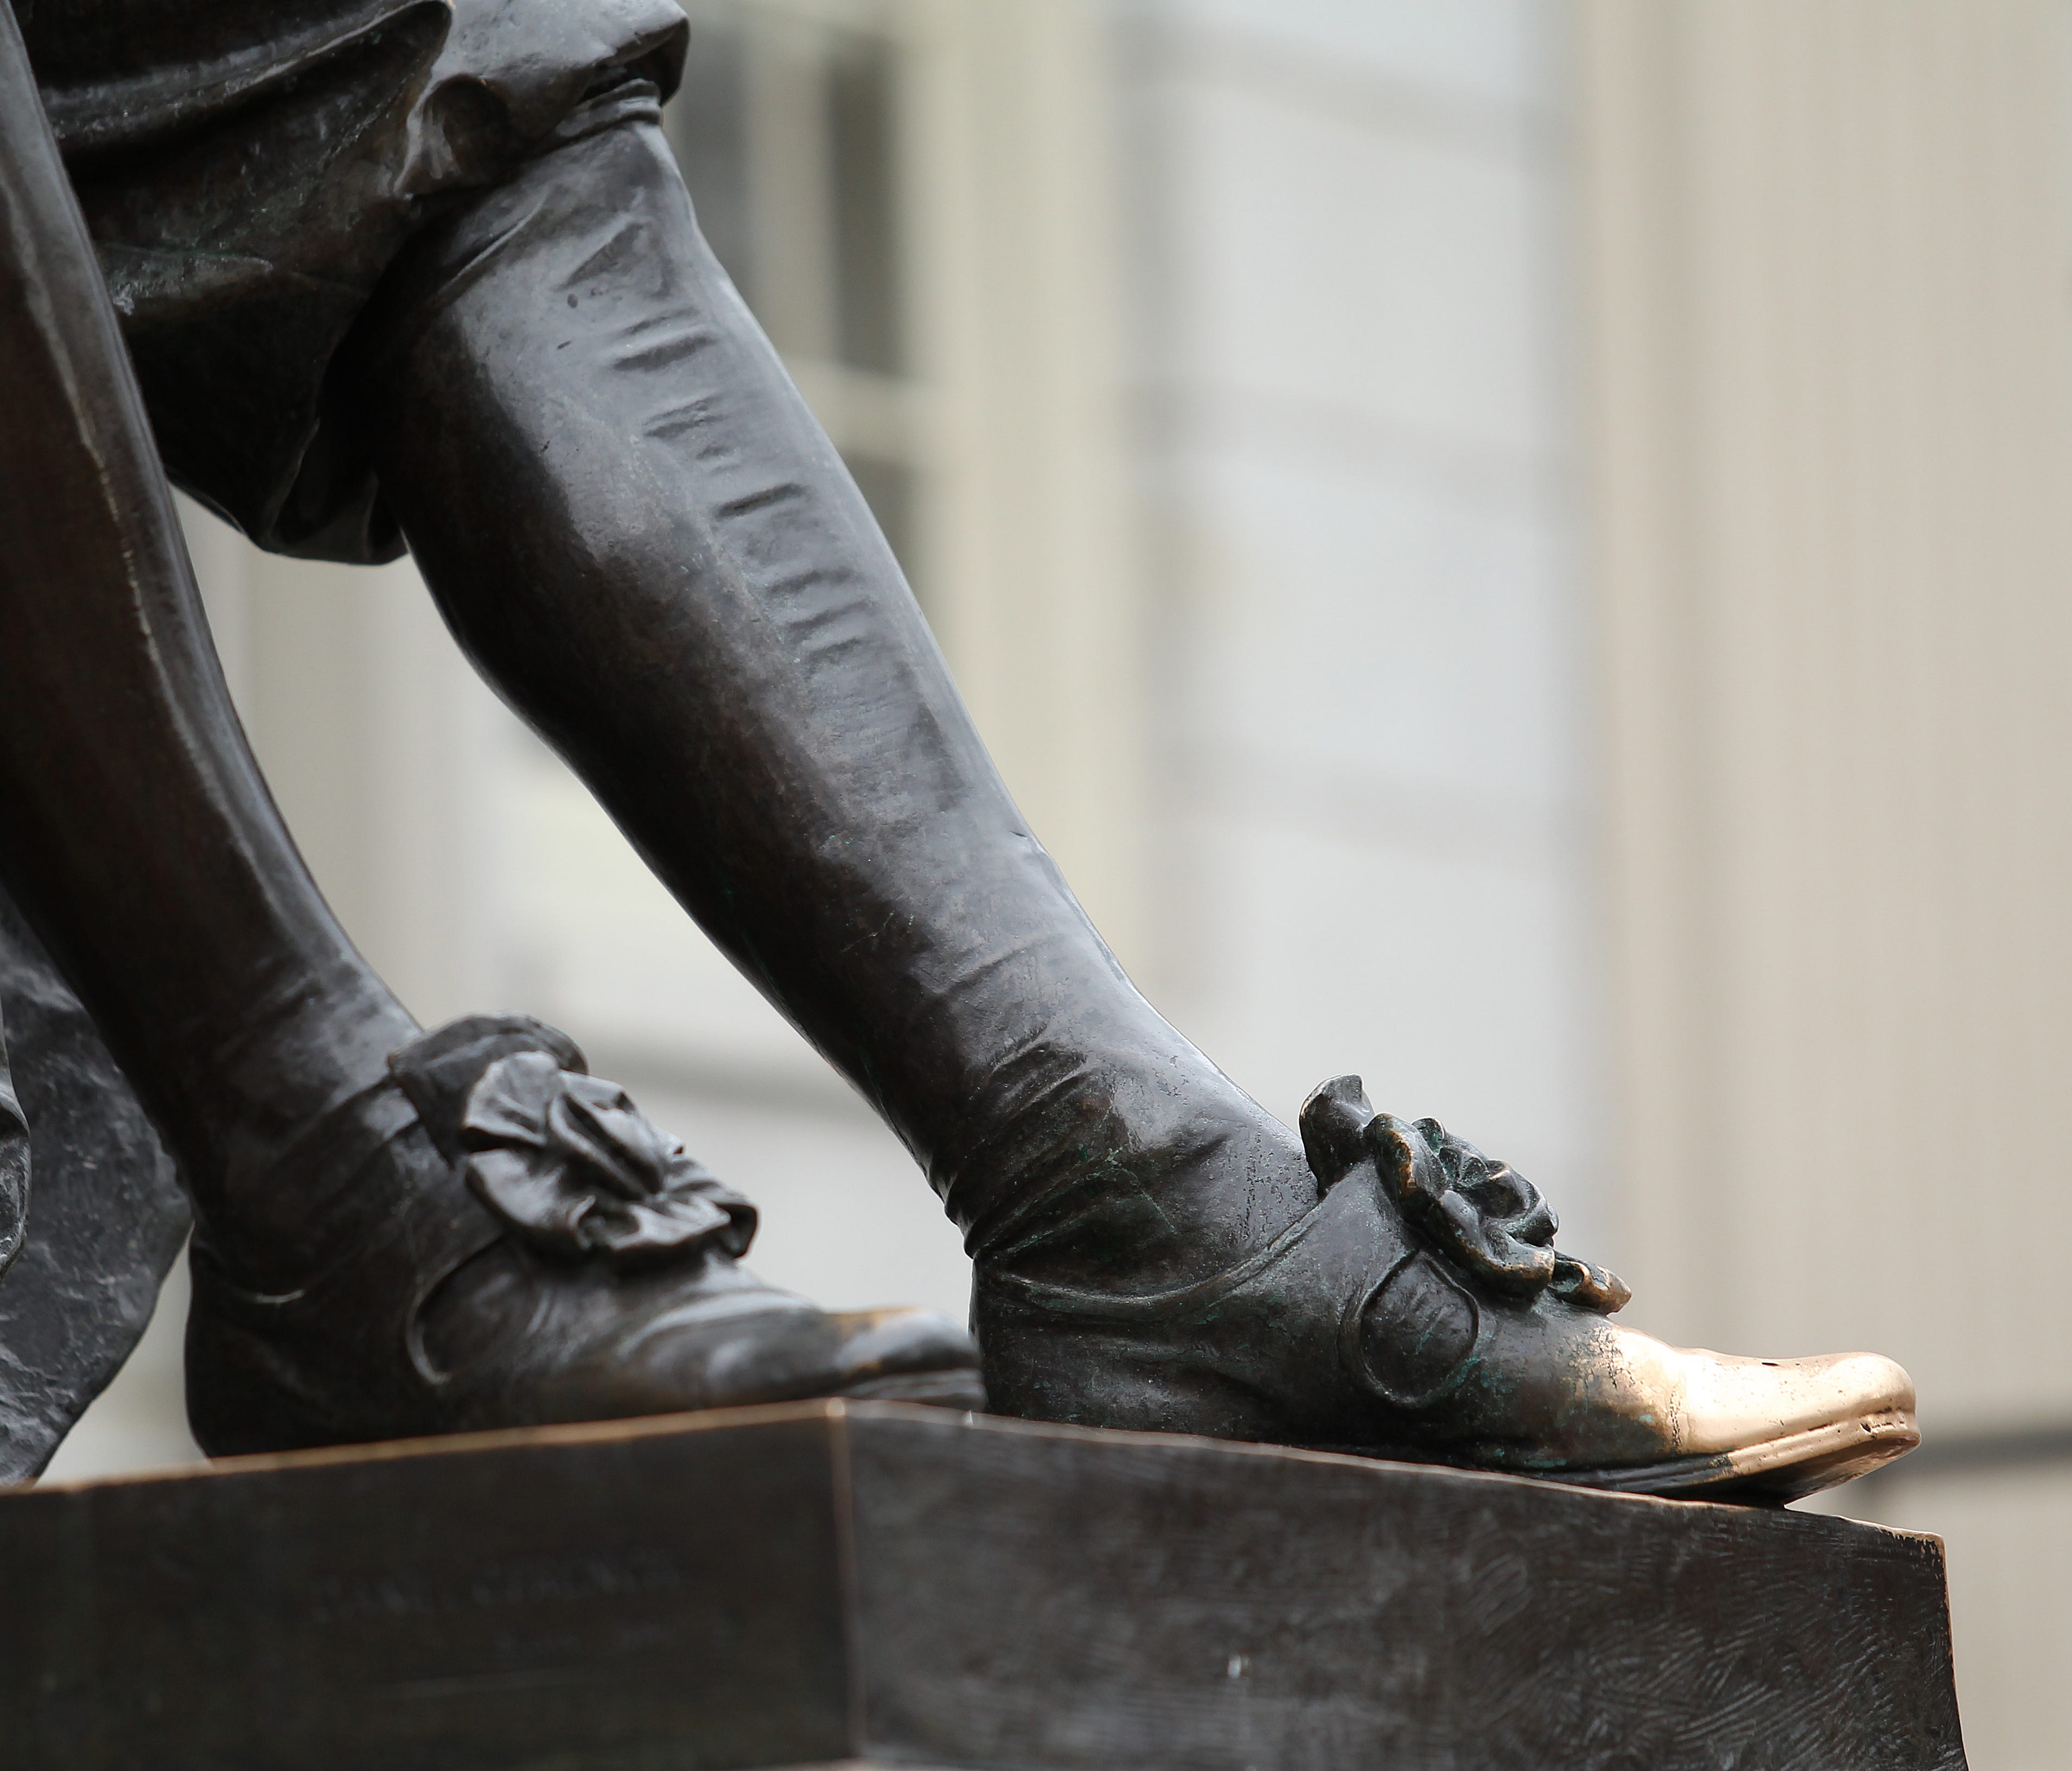 Many prospective Harvard students touch the left shoe of the John Harvard statue for luck. But you need way more than luck to get in.